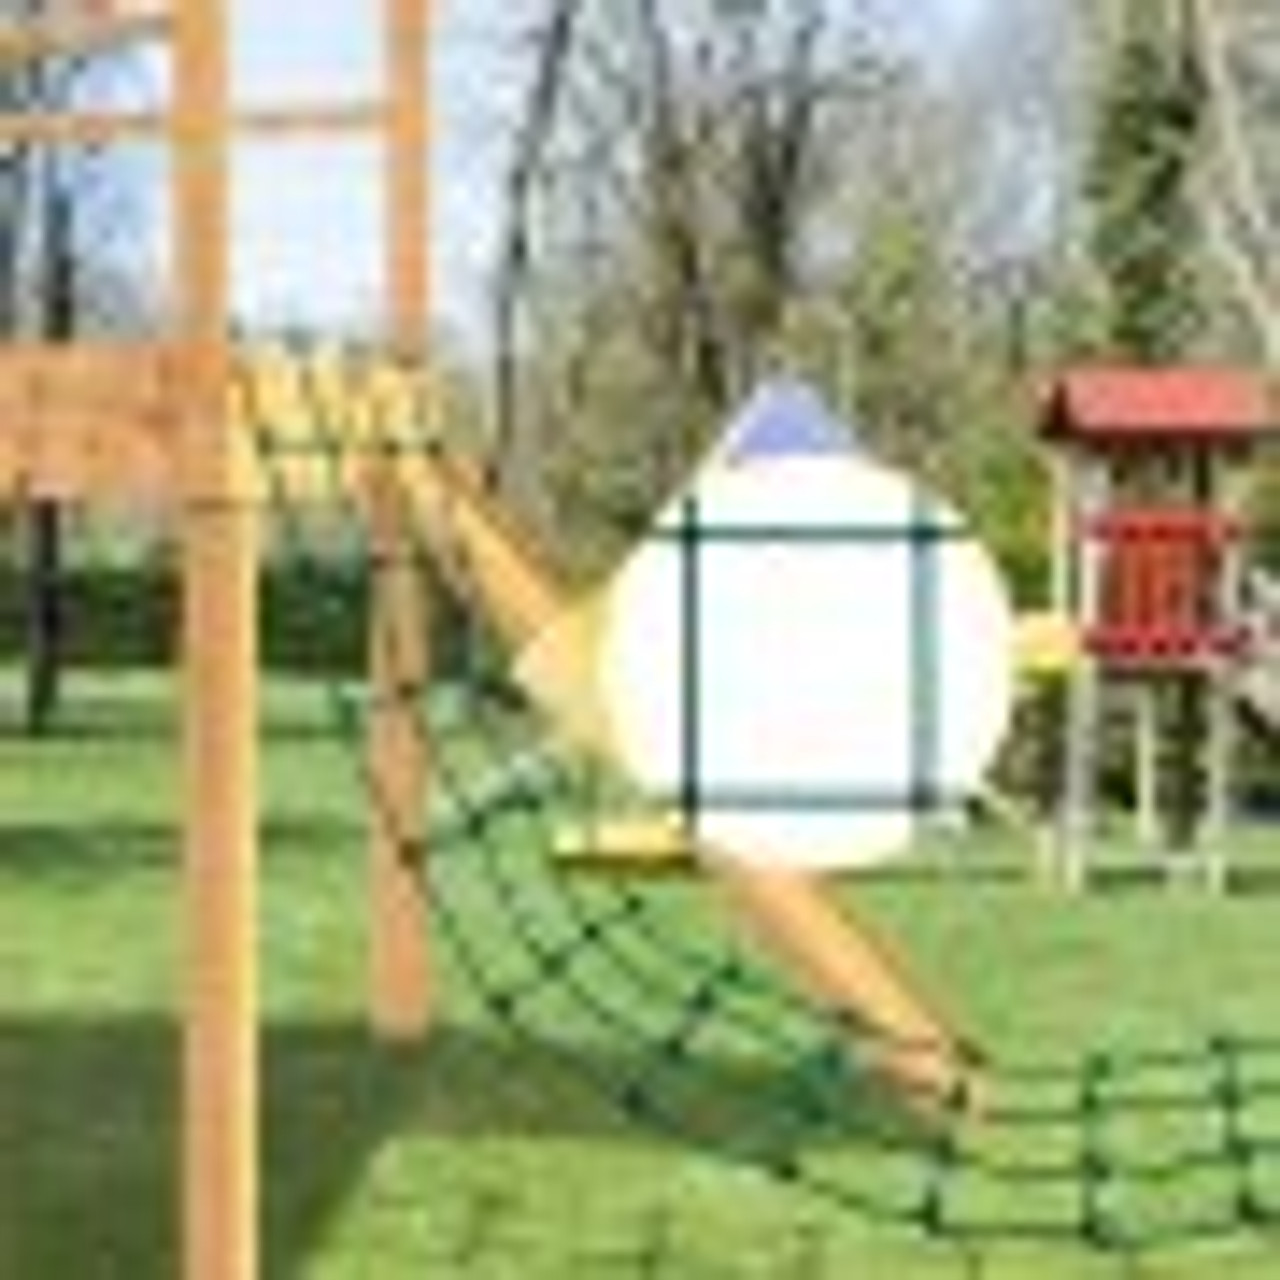 Climbing Cargo Net, 30" x 150" Climbing Net, Polyester Playground Climbing Cargo Net, Rope Ladder, Swingset, Large Military Climbing Cargo Net for Kid & Adult, Indoor & Outdoor, Treehouse, Green